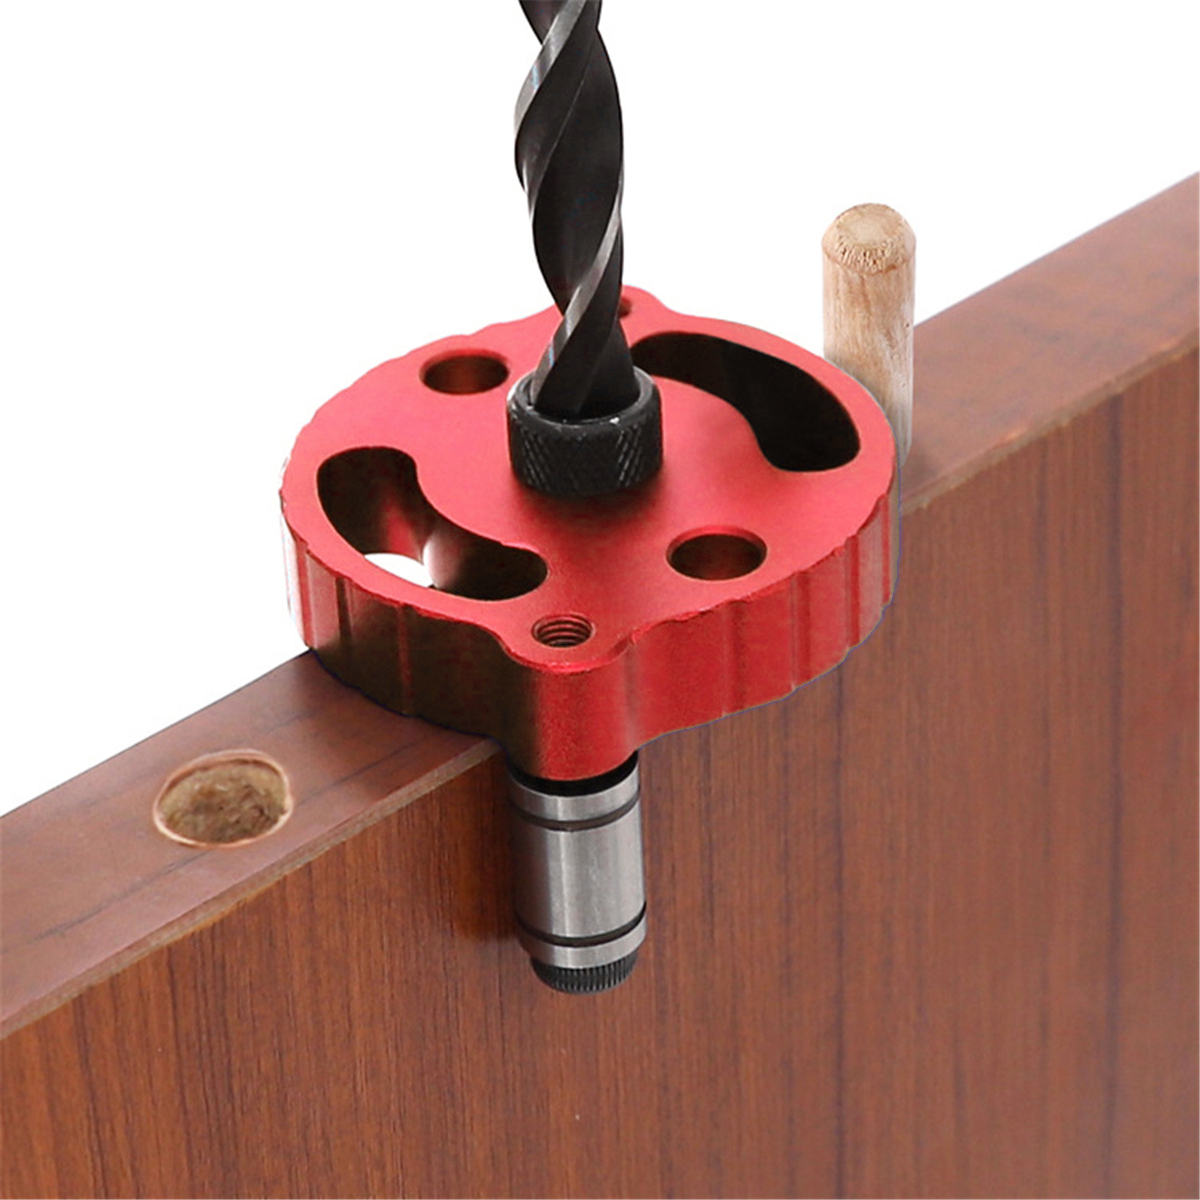 Self-centering-6810mm-Dowelling-Jig-Wood-Panel-Puncher-Hole-Locator-Measuring-Drilling-Woodworking-T-1626512-7